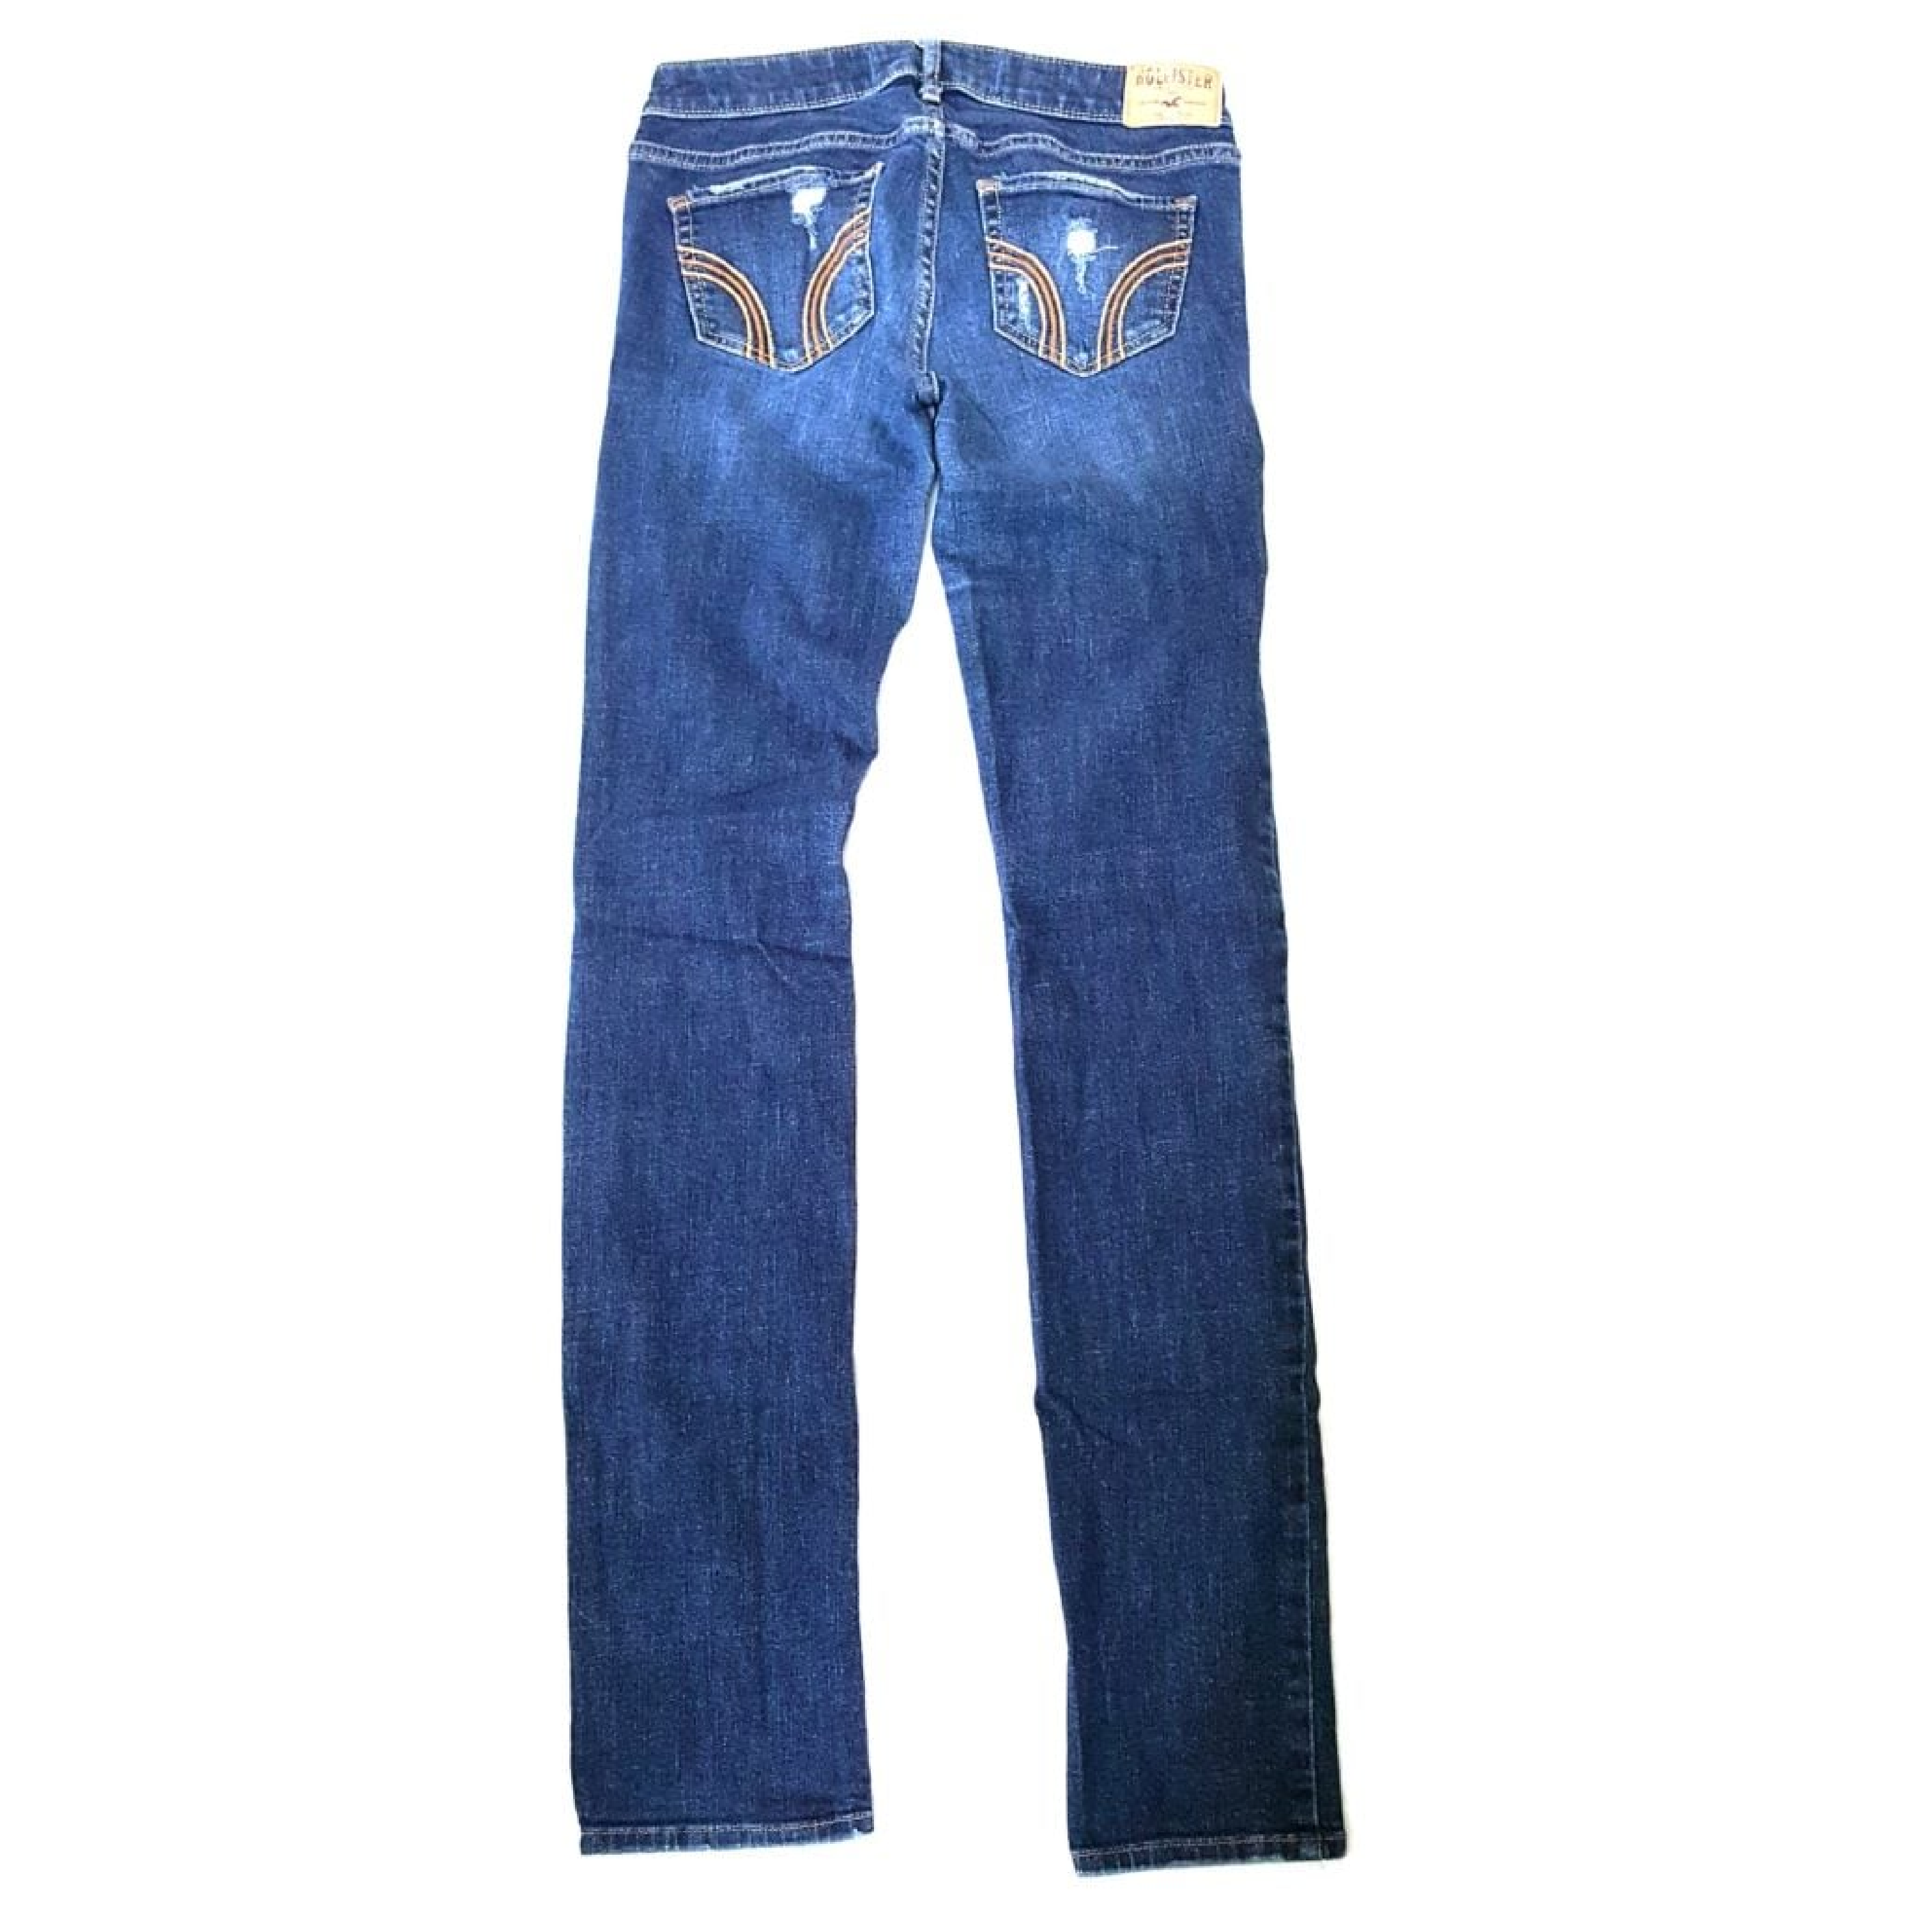 Hollister Jeans Size 55  Hollister jeans, Jeans size, Jeans